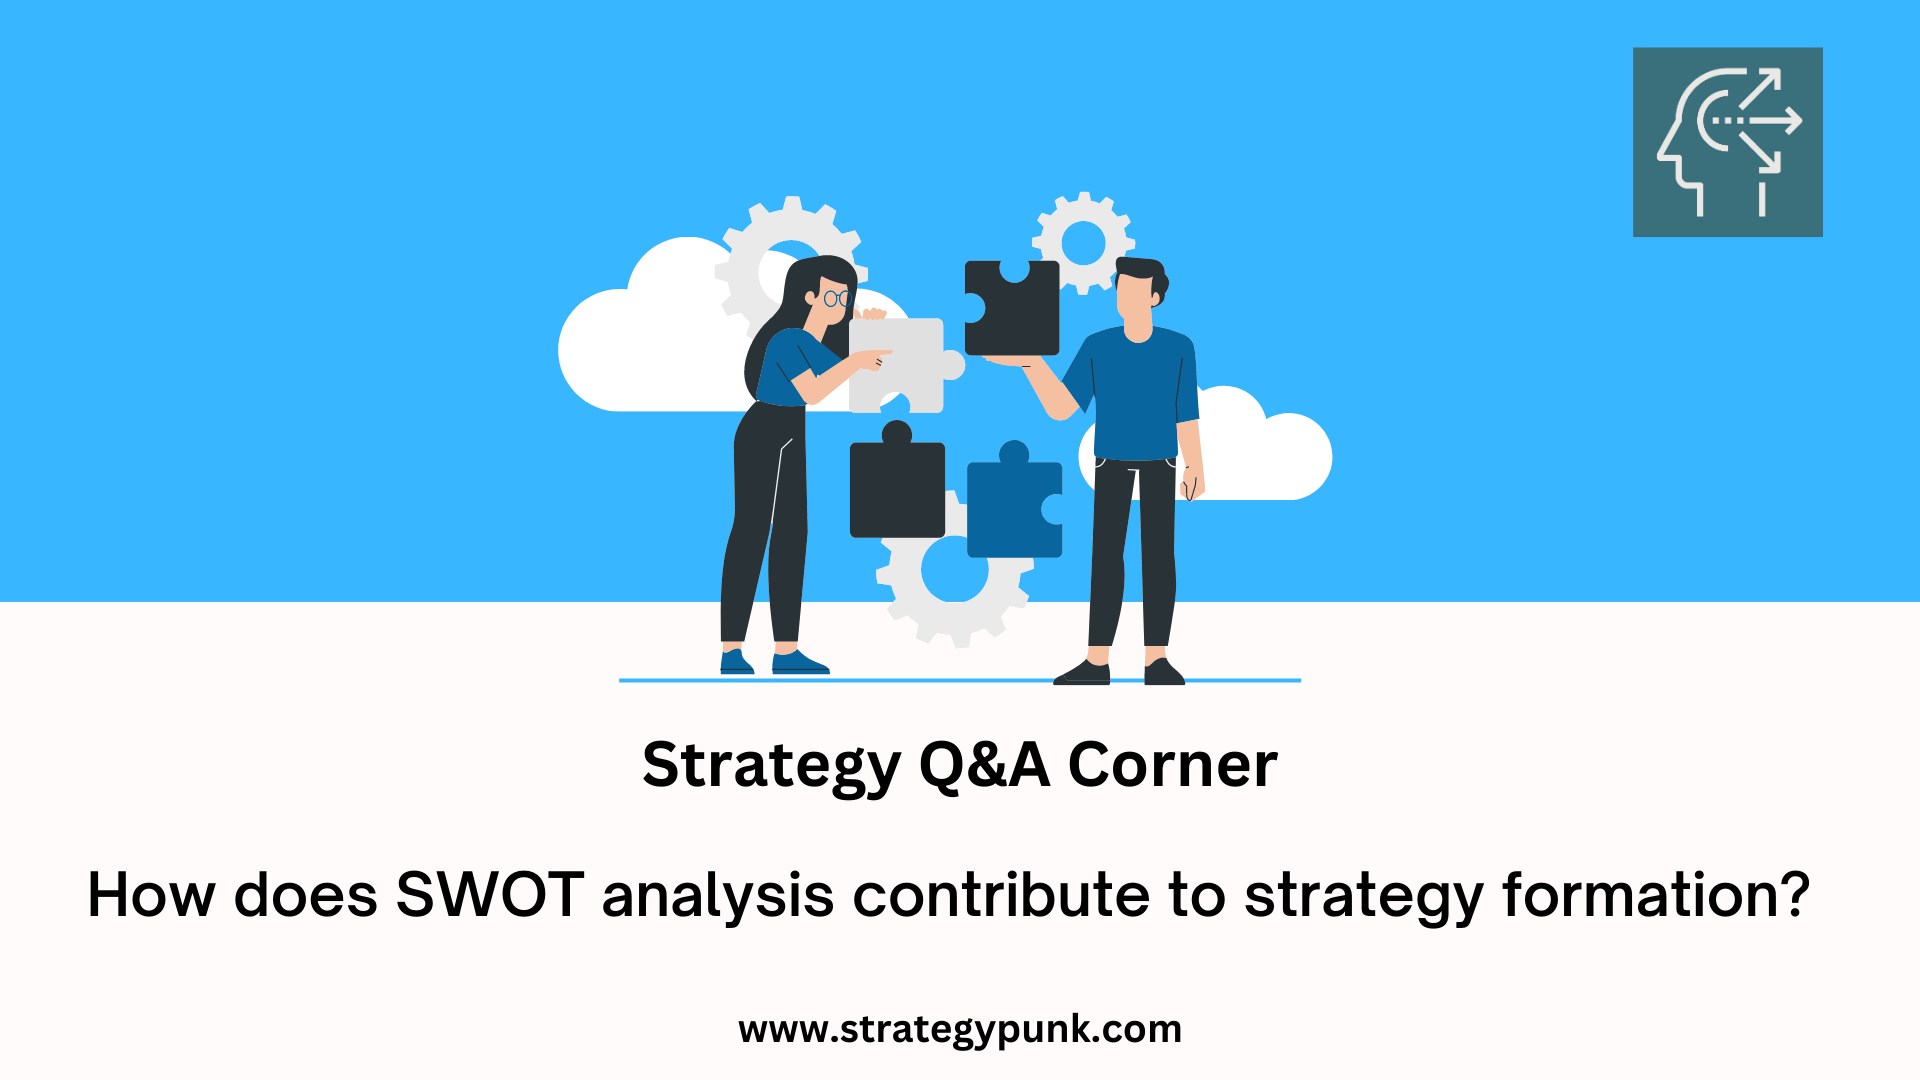 How does SWOT analysis contribute to strategy formation?